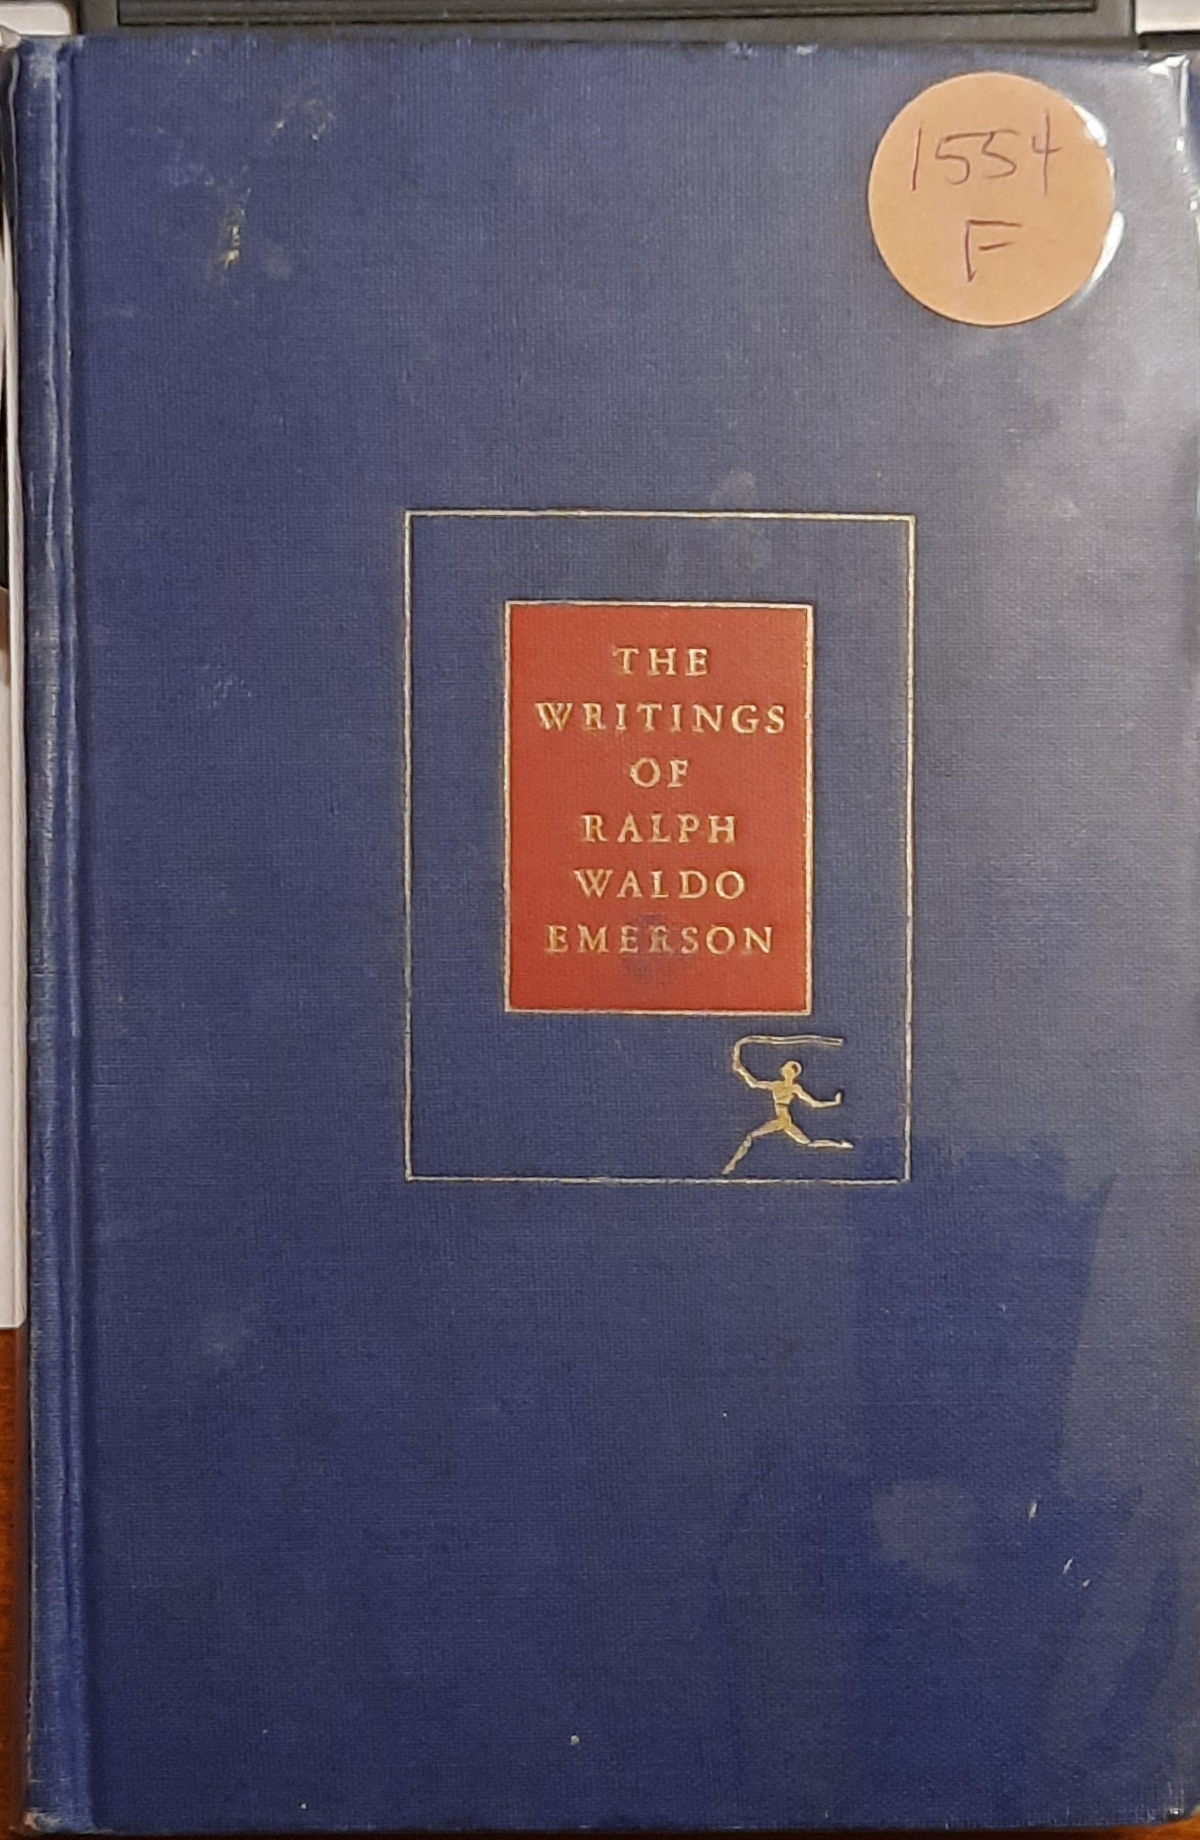 The Complete Essays And Other Writings Of Ralph Waldo Emerson By Brooks Atkinson Very Good Hardcover 1940 Aries Company Llc